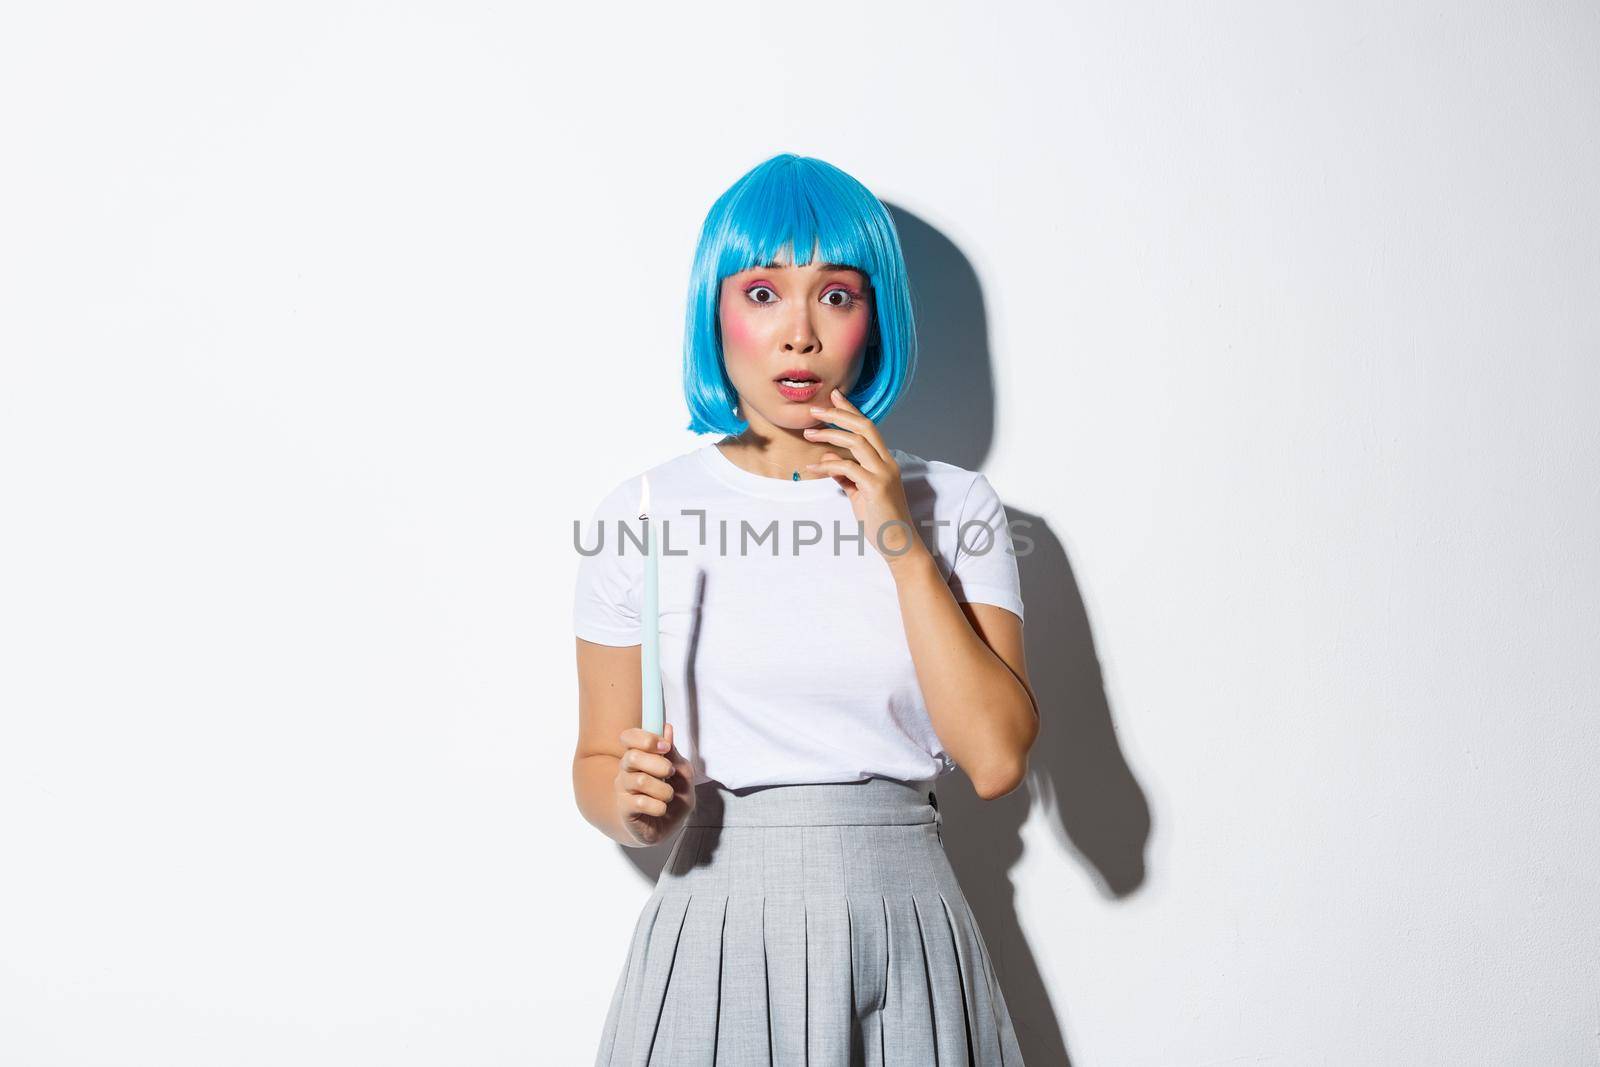 Concept of halloween. Image of scared timid asian girl in blue wig, holding candle and looking at something scary.